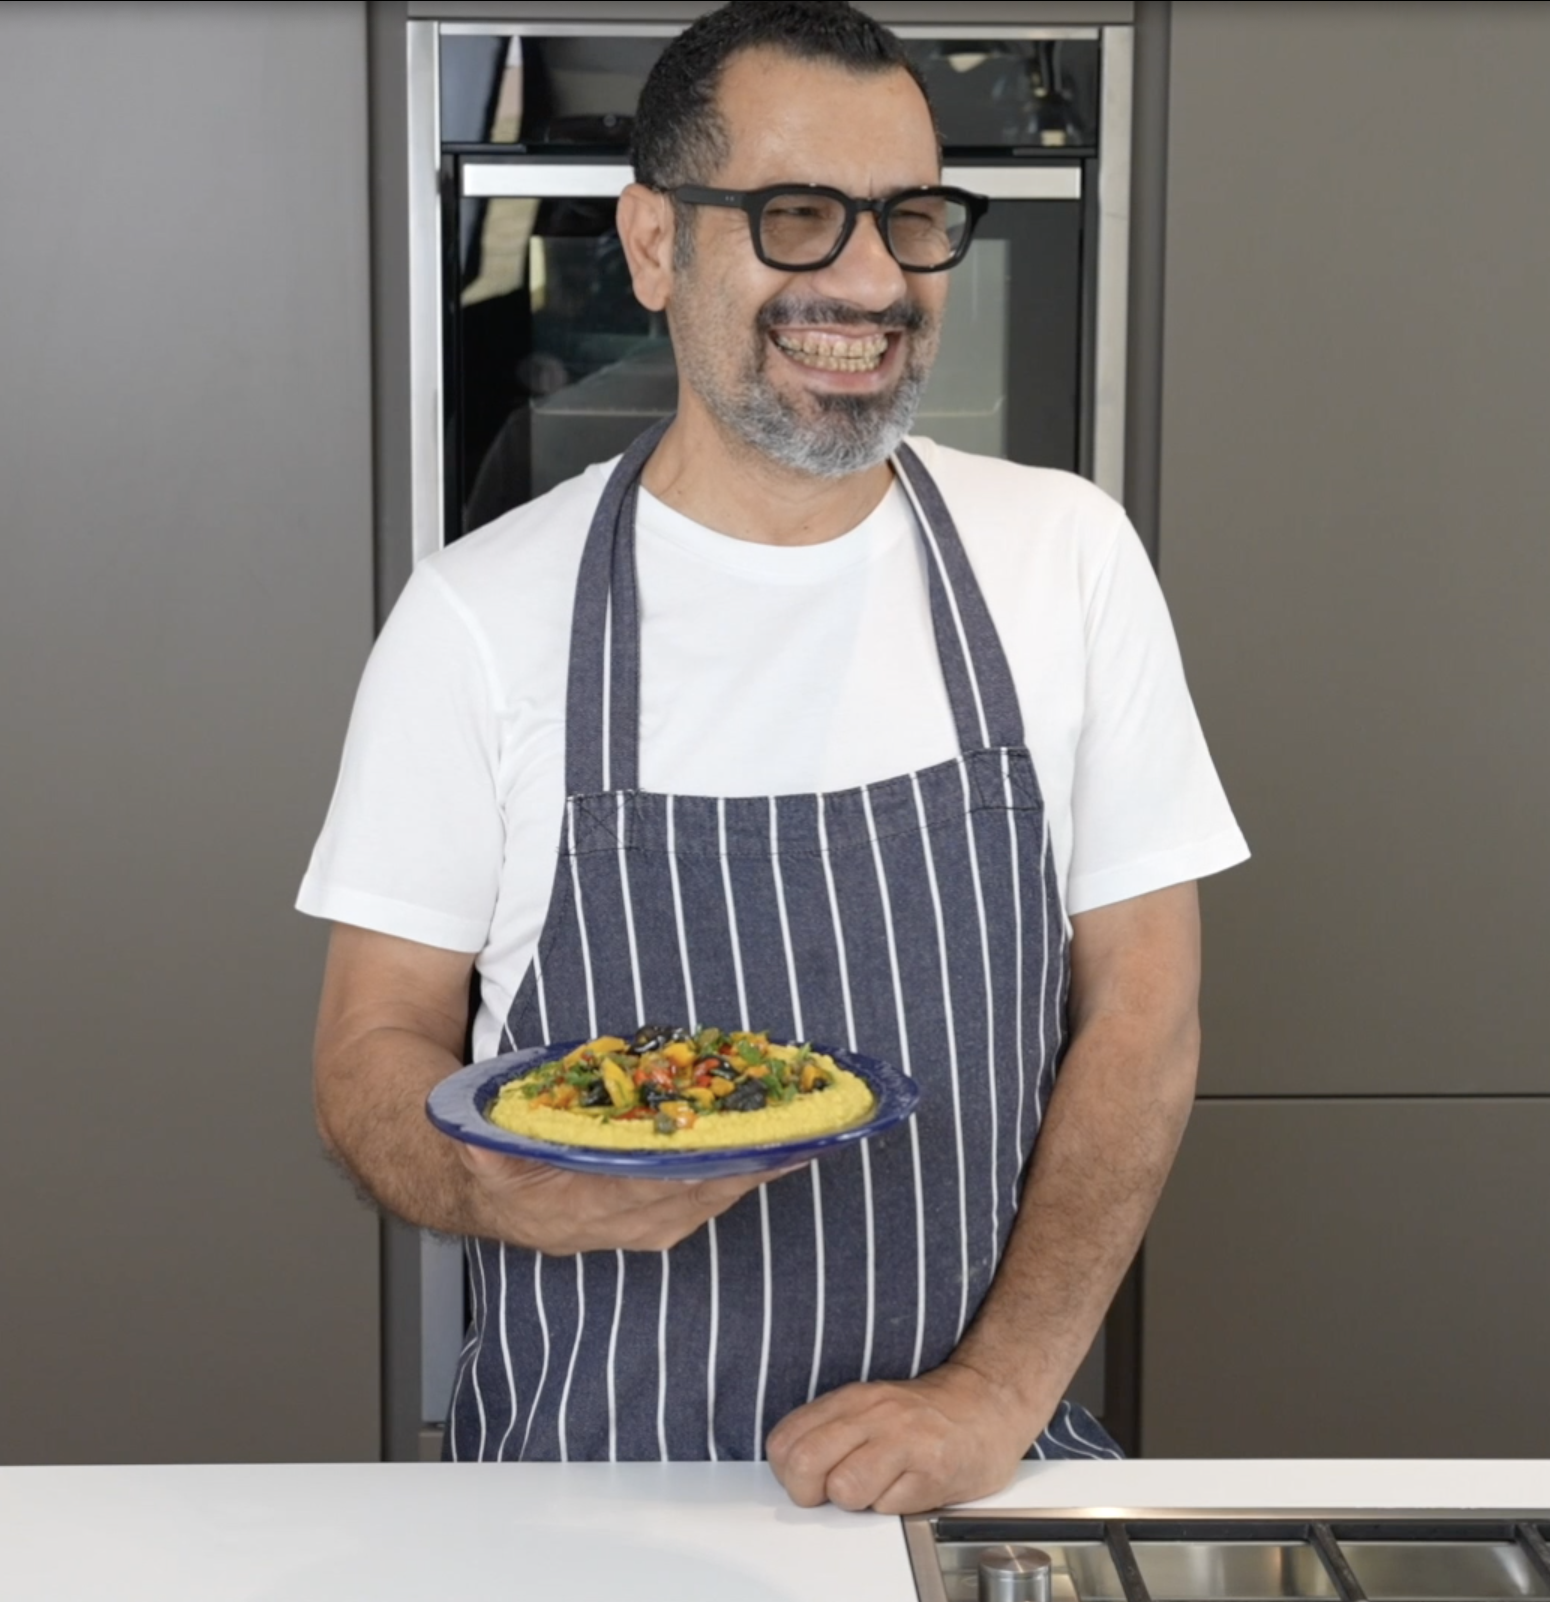 Chef Sami Tamimi wears a white tshirt and grey striped apron, holding a plate of Tunisian chickpeas behind a kitchen counter.